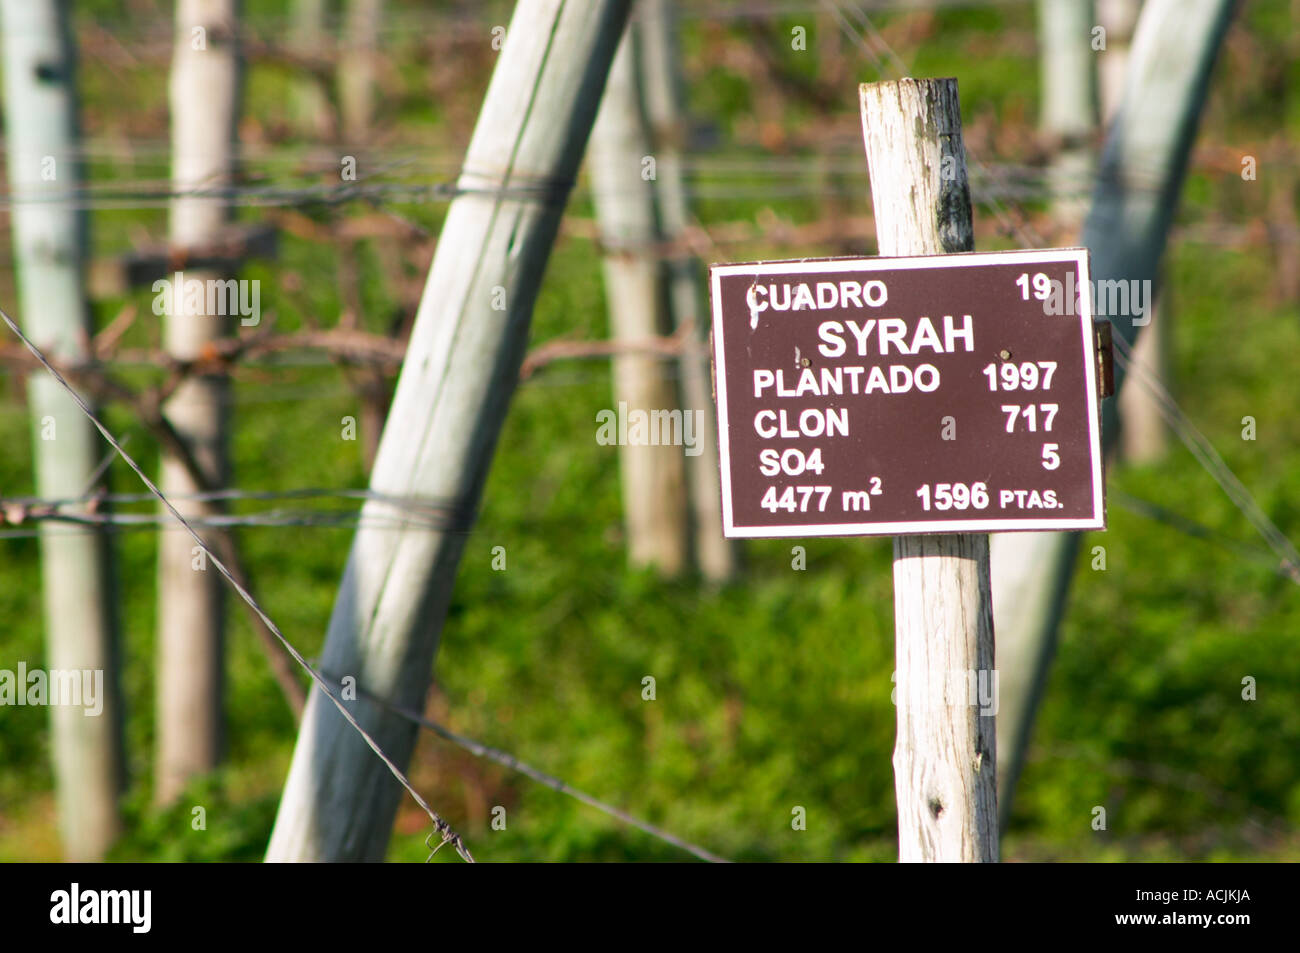 A sign in the vineyard showing that this plot is planted with Syrah Vinedos y Bodega Filgueira Winery, Cuchilla Verde, Canelones, Montevideo, Uruguay, South America Stock Photo